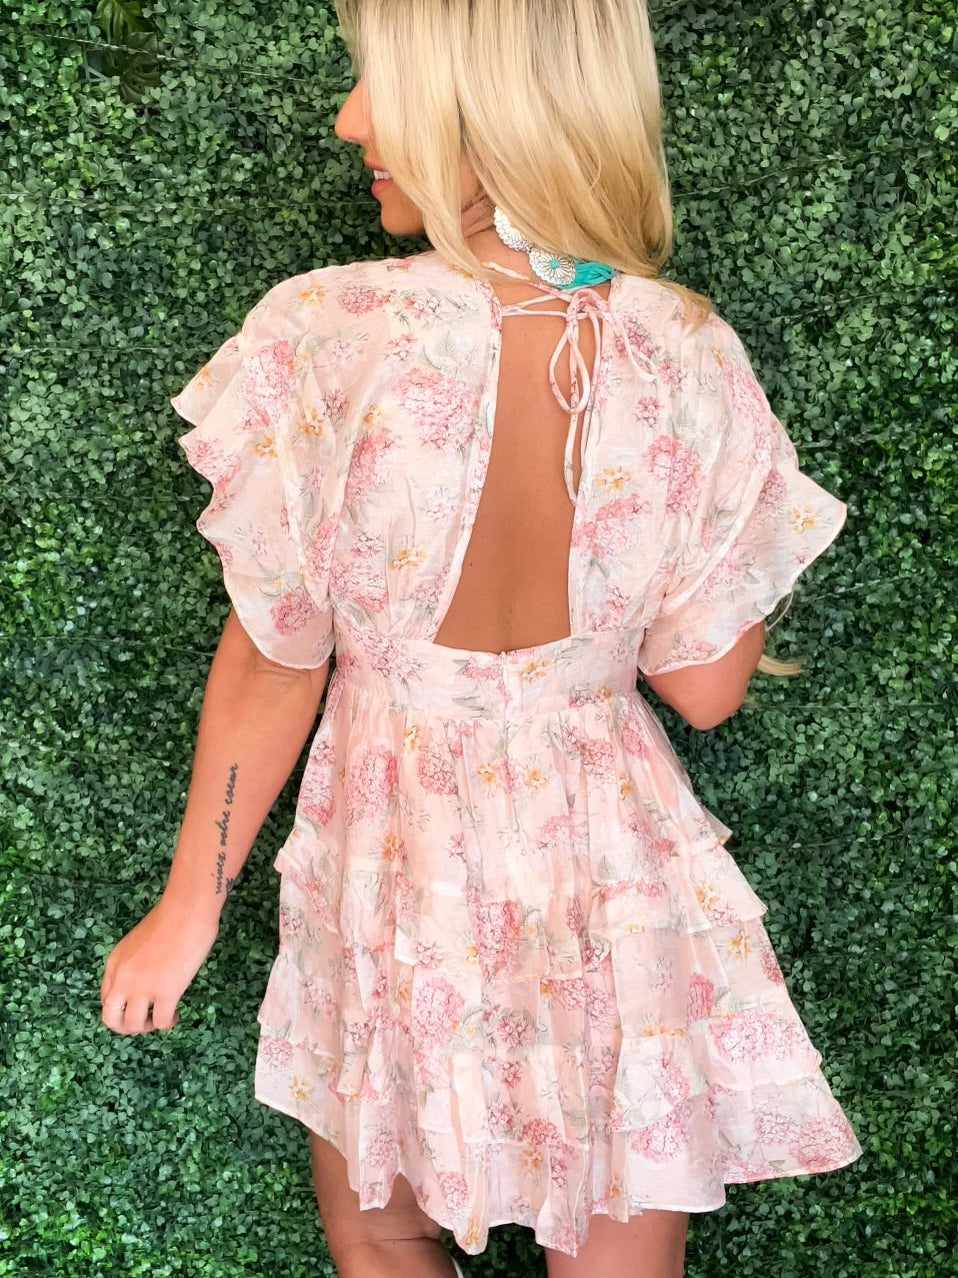 Blushing Over You Floral Dress